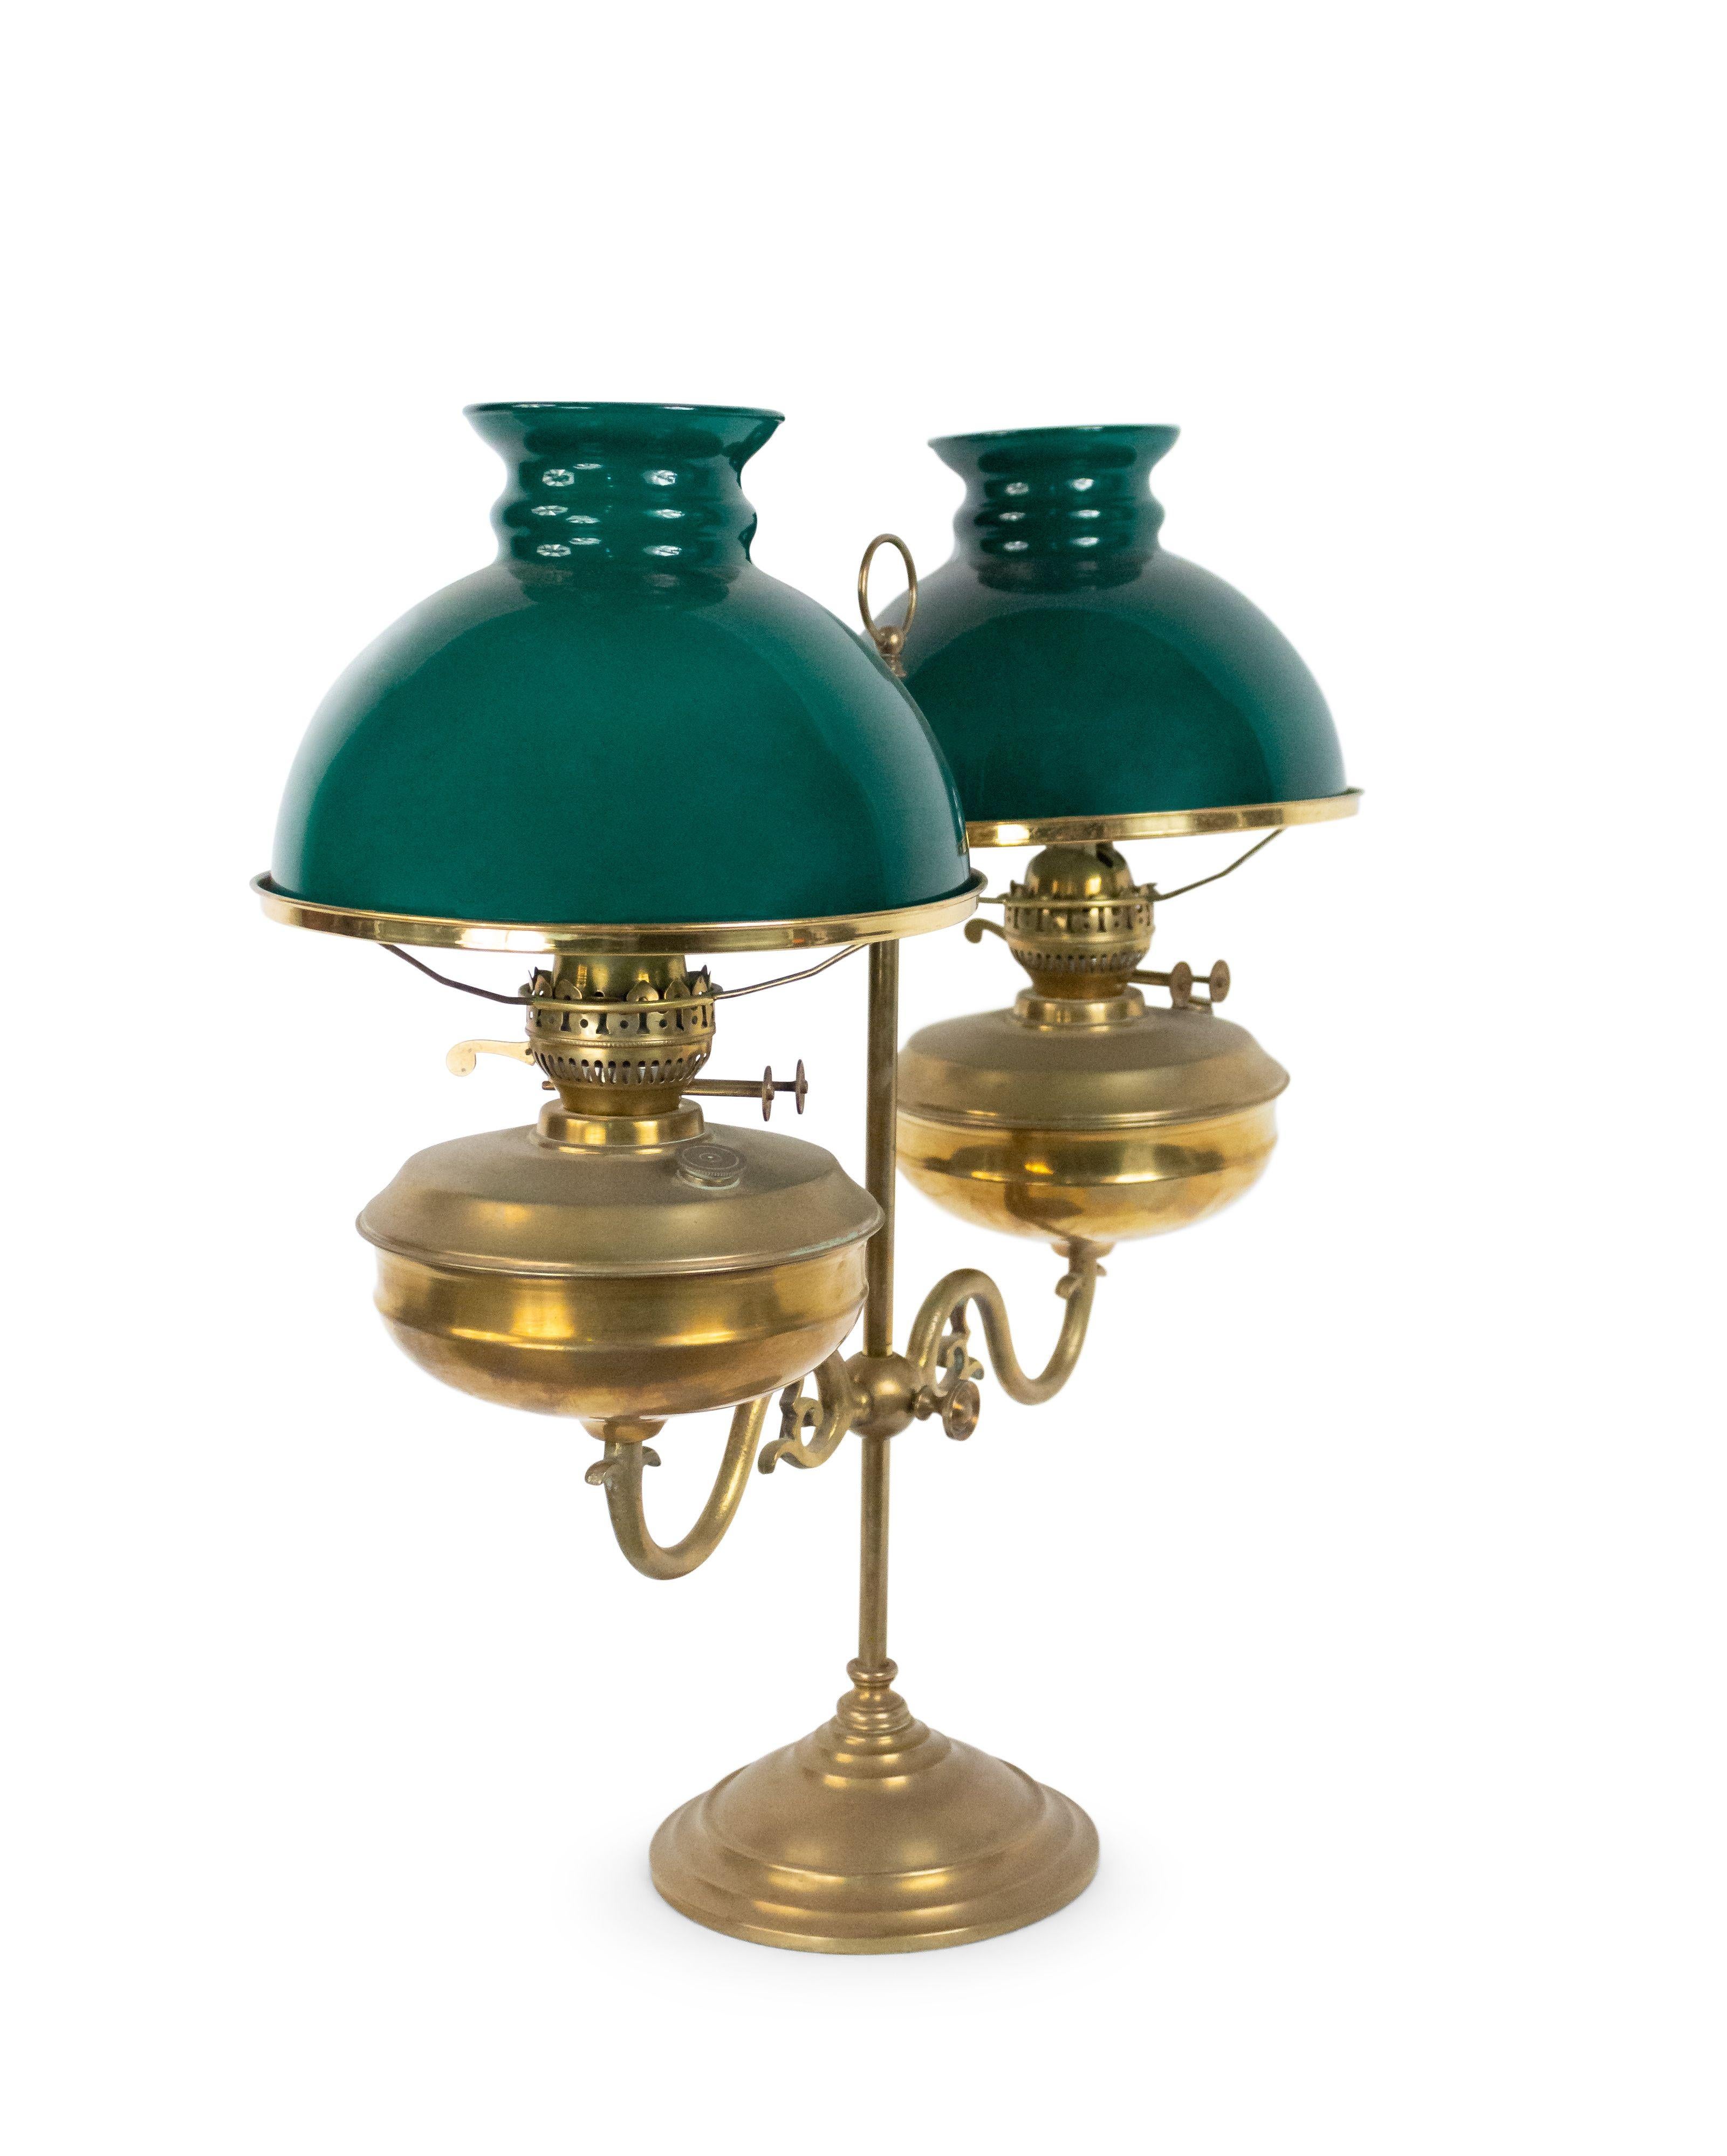 English Victorian style bronze adjustable double arm student lamp with oil font supporting green glass shades.